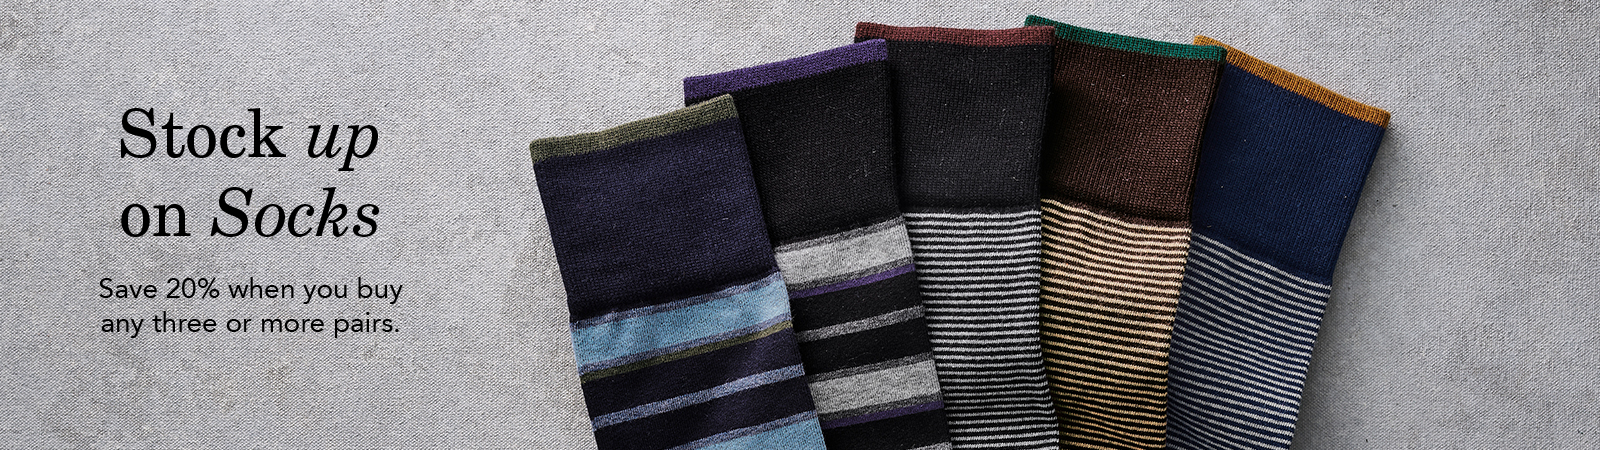 Stock Up on Socks. Save 20% when you buy three or more pairs.